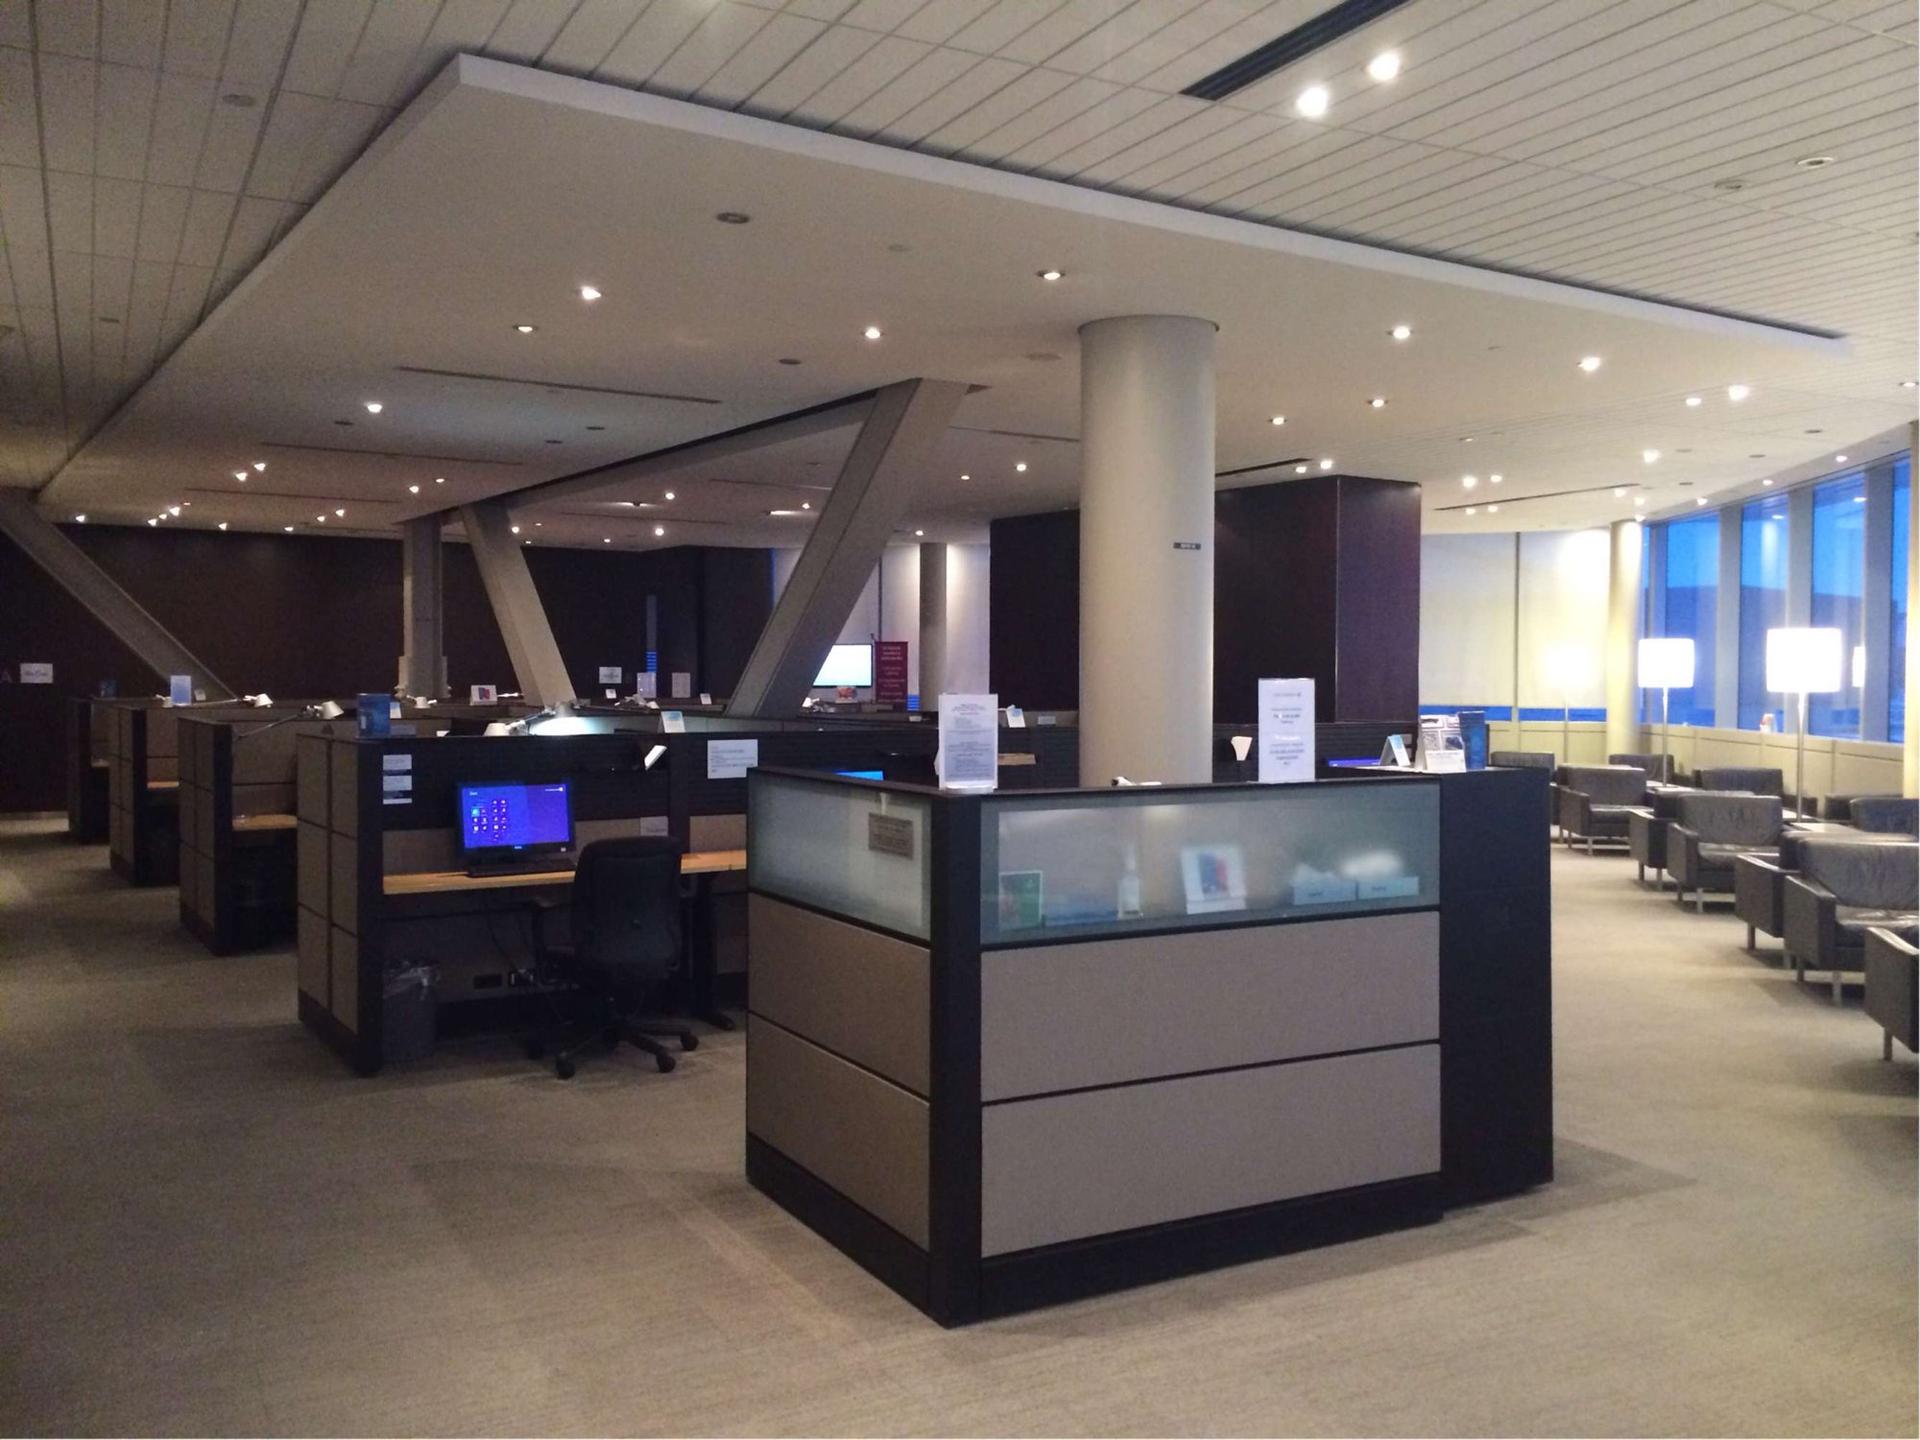 Air Canada Maple Leaf Lounge image 5 of 21